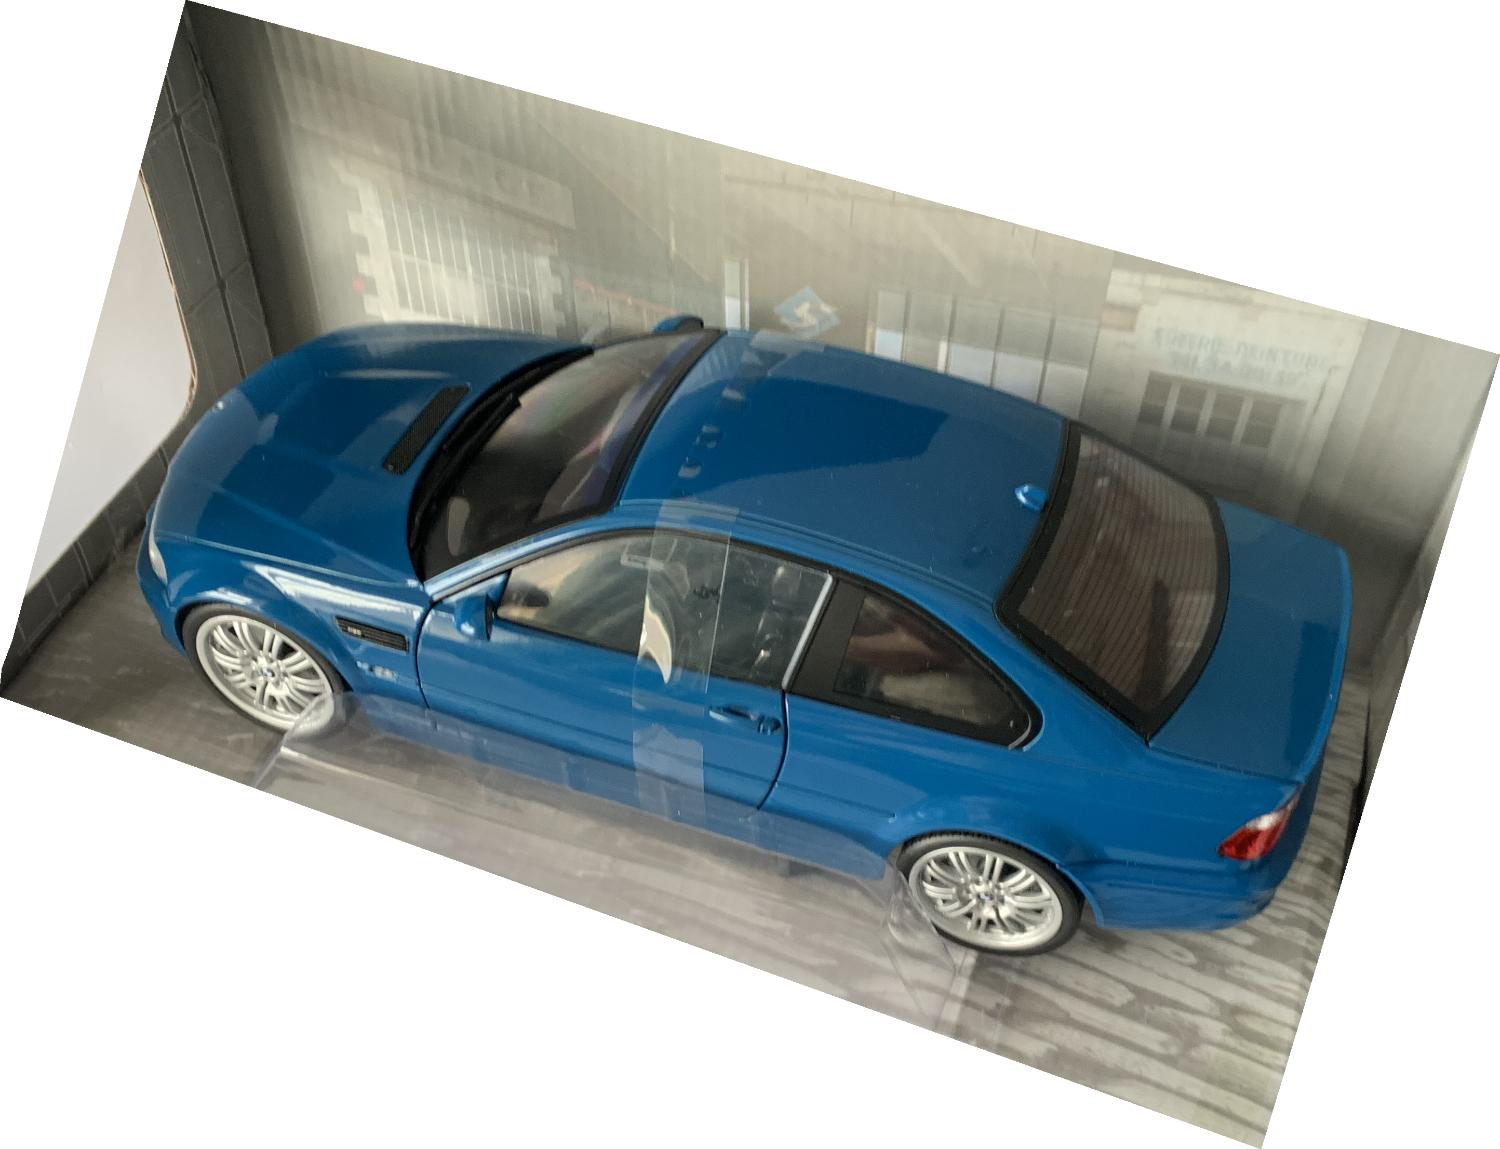 BMW E46 Coupe M3 2000 in laguna blue 1:18 scale model from Solido